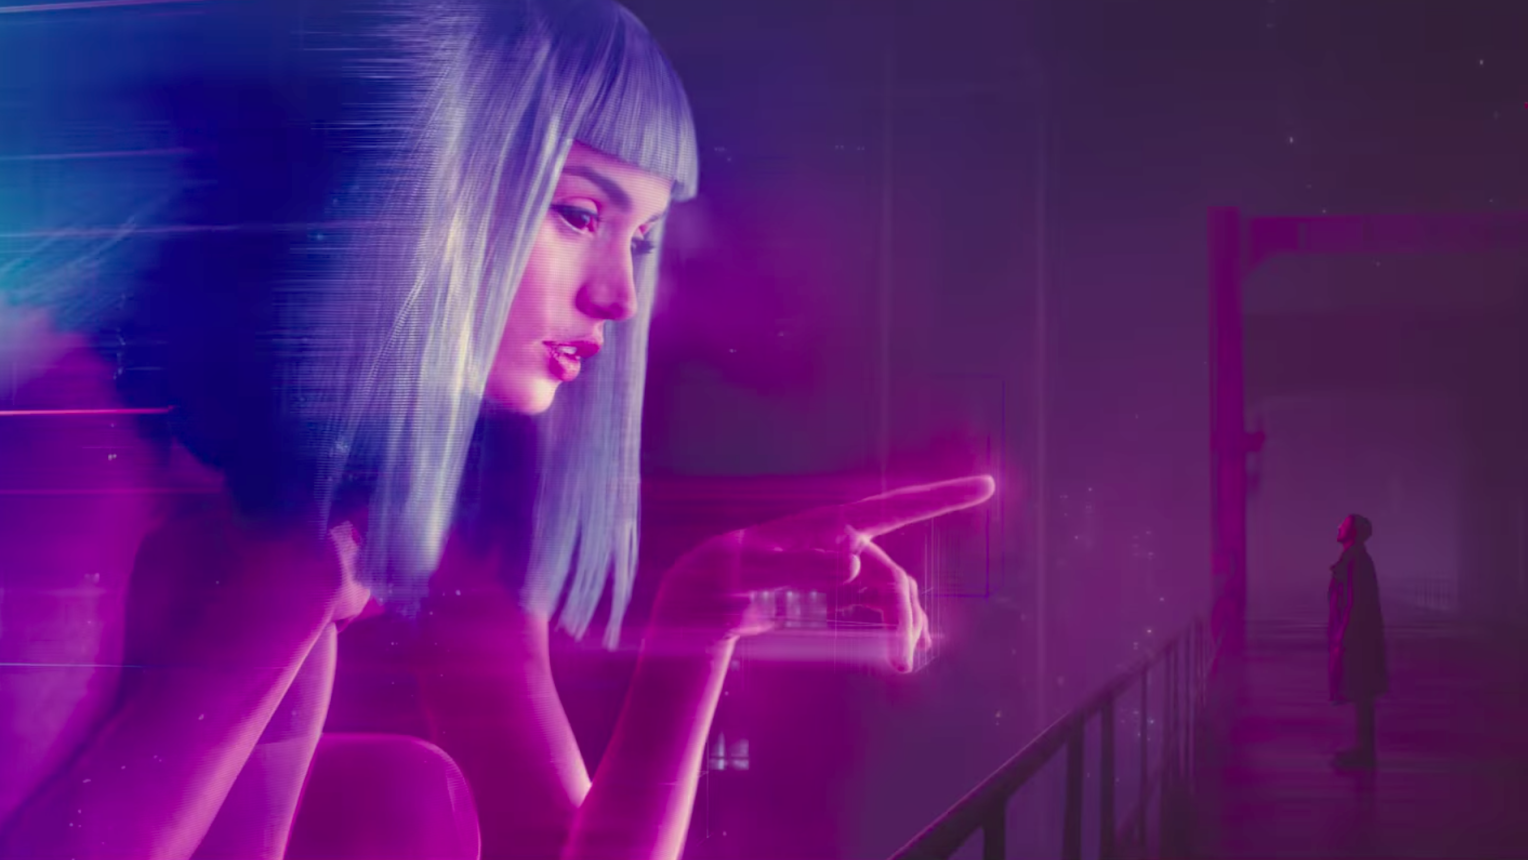 Get ready to return to the world of Blade Runner. (Image: Warner Bros.)